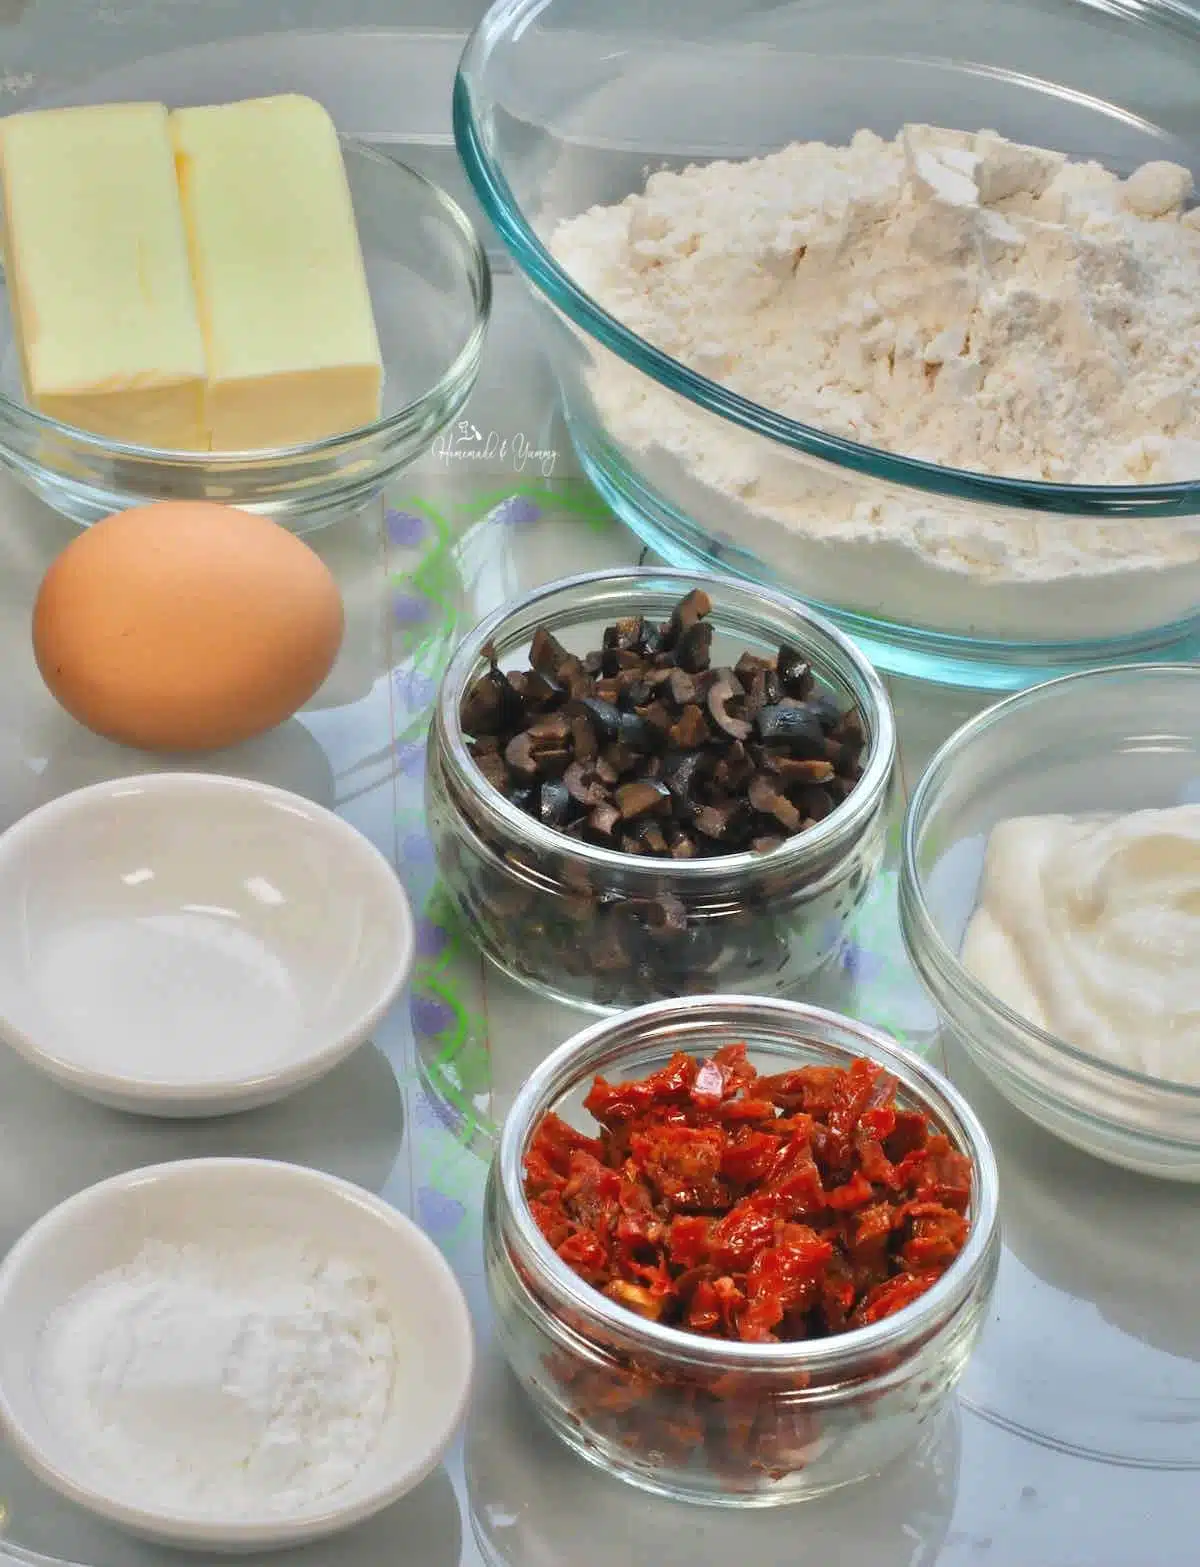 Ingredients needed for making this savoury scone recipe.